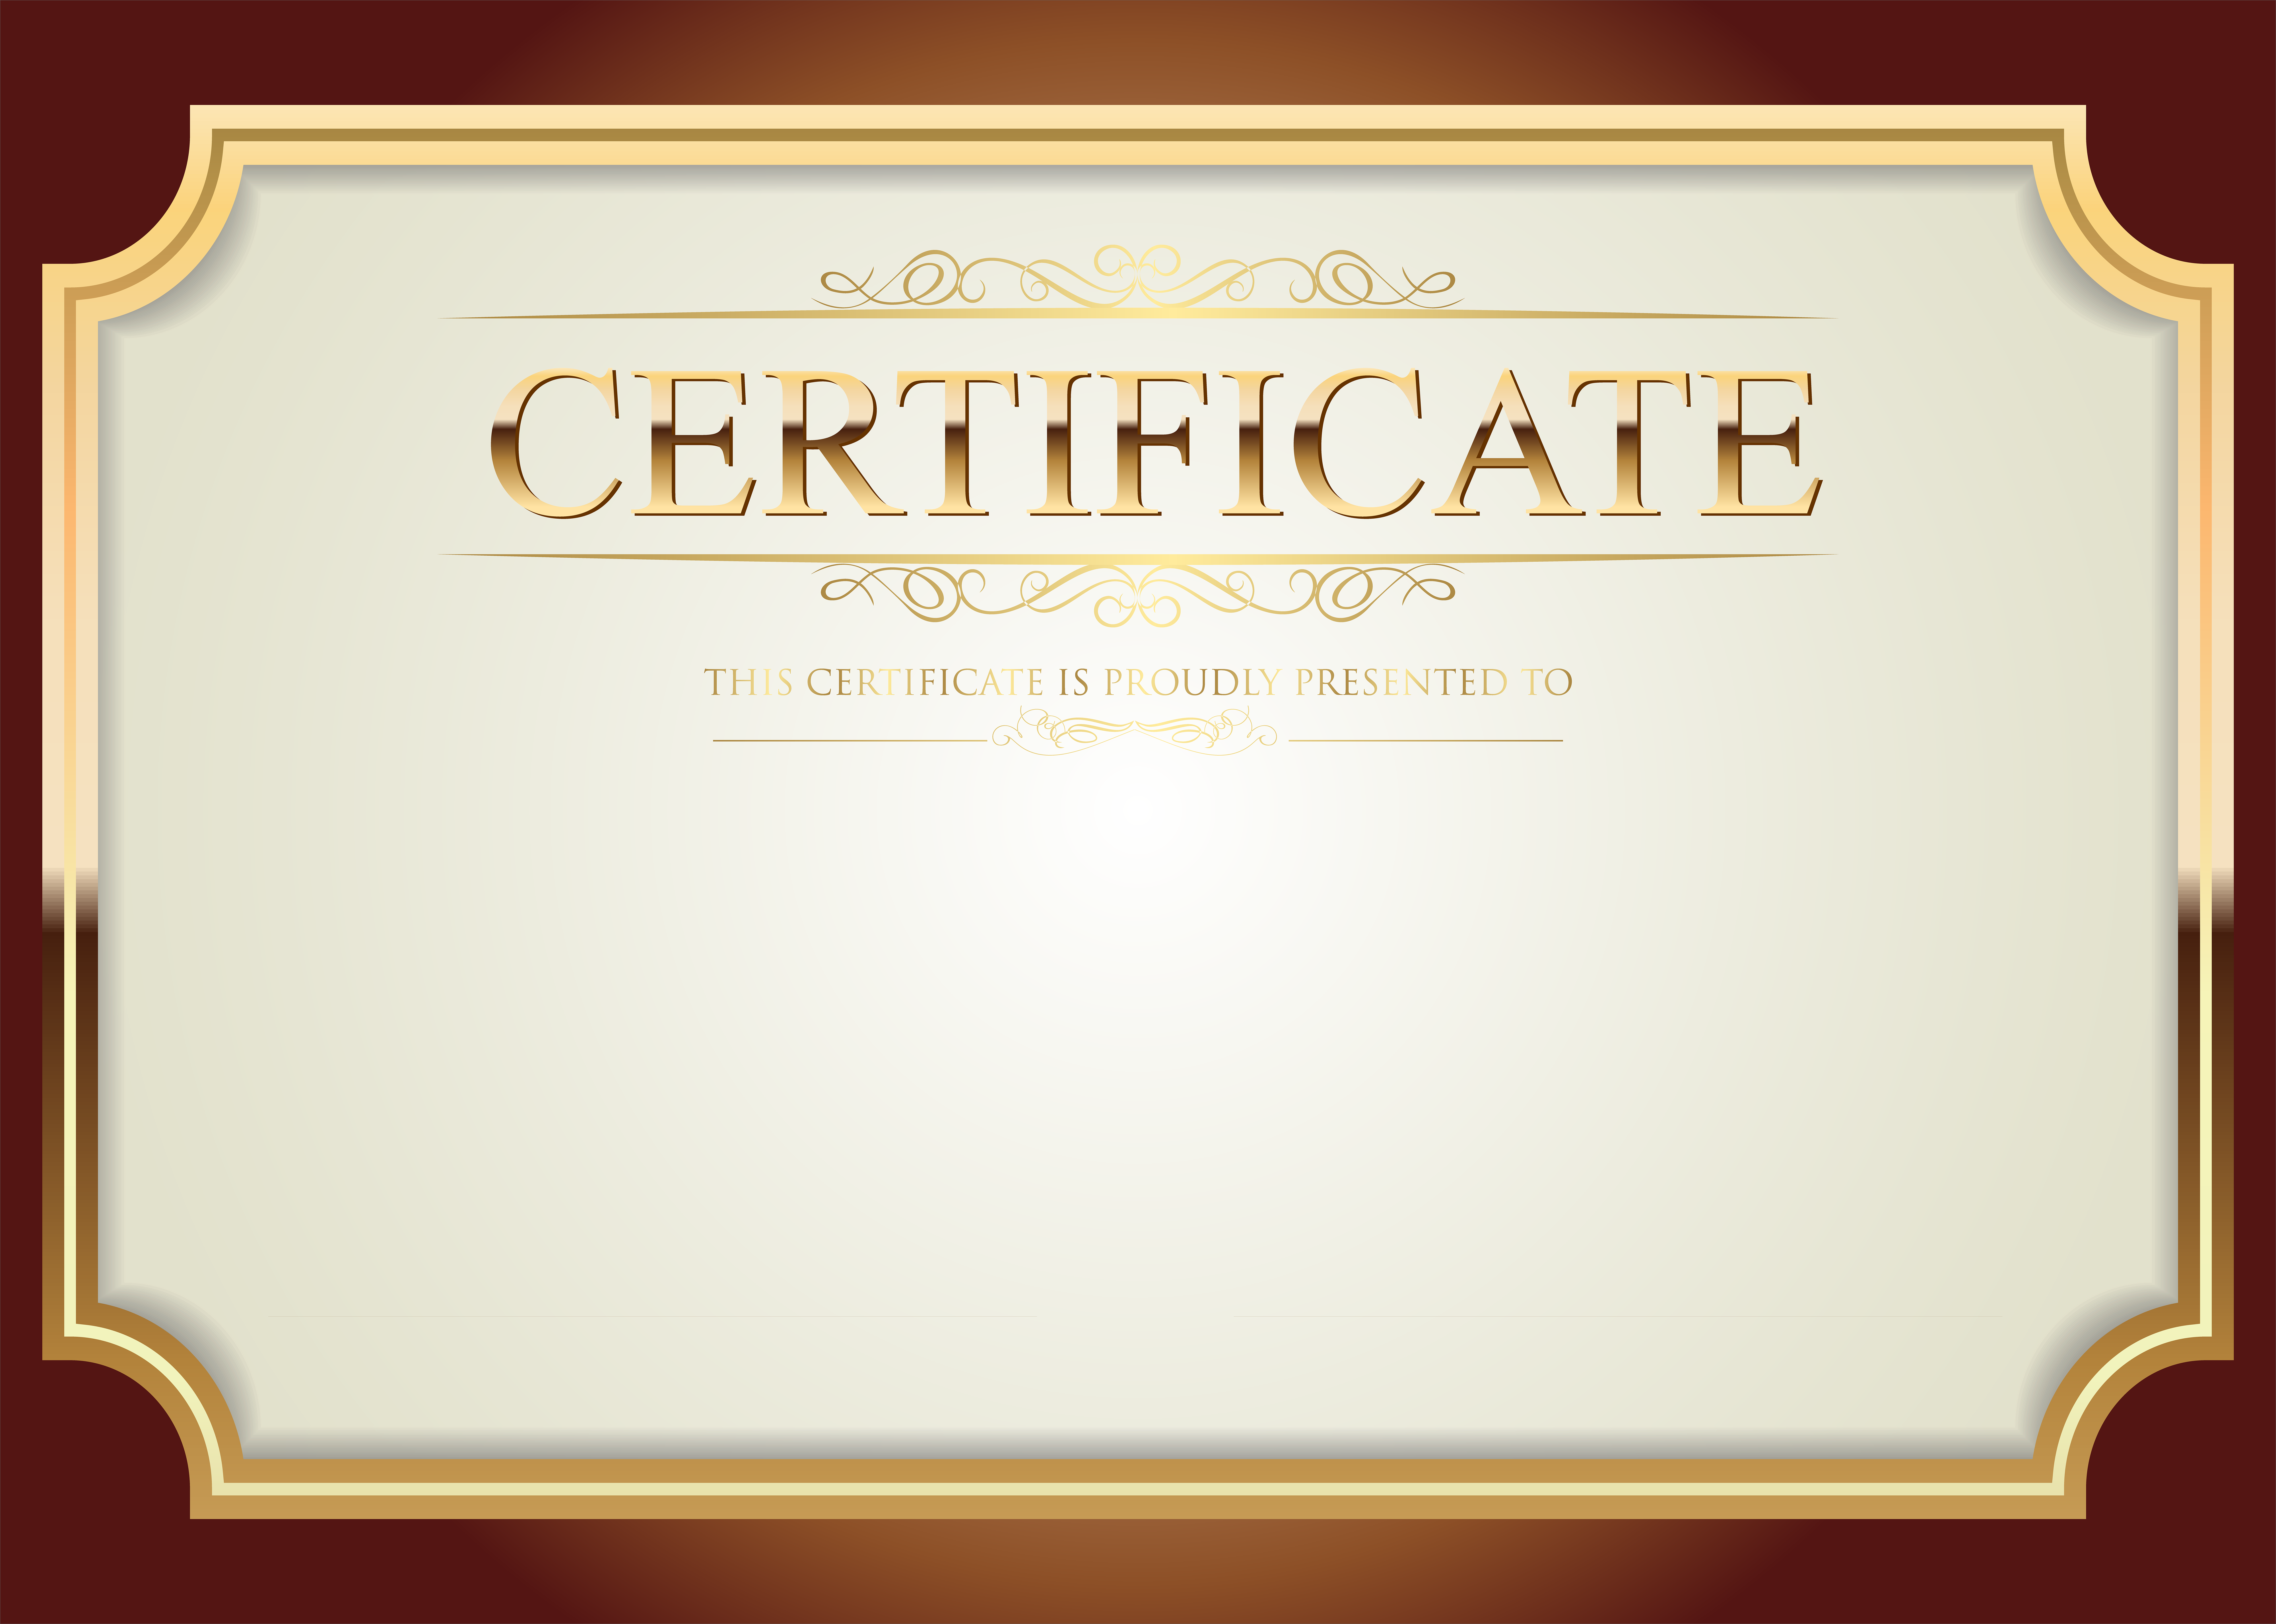 Certificate Template PNG Clip Art | Gallery Yopriceville - High-Quality  Images and Transparent